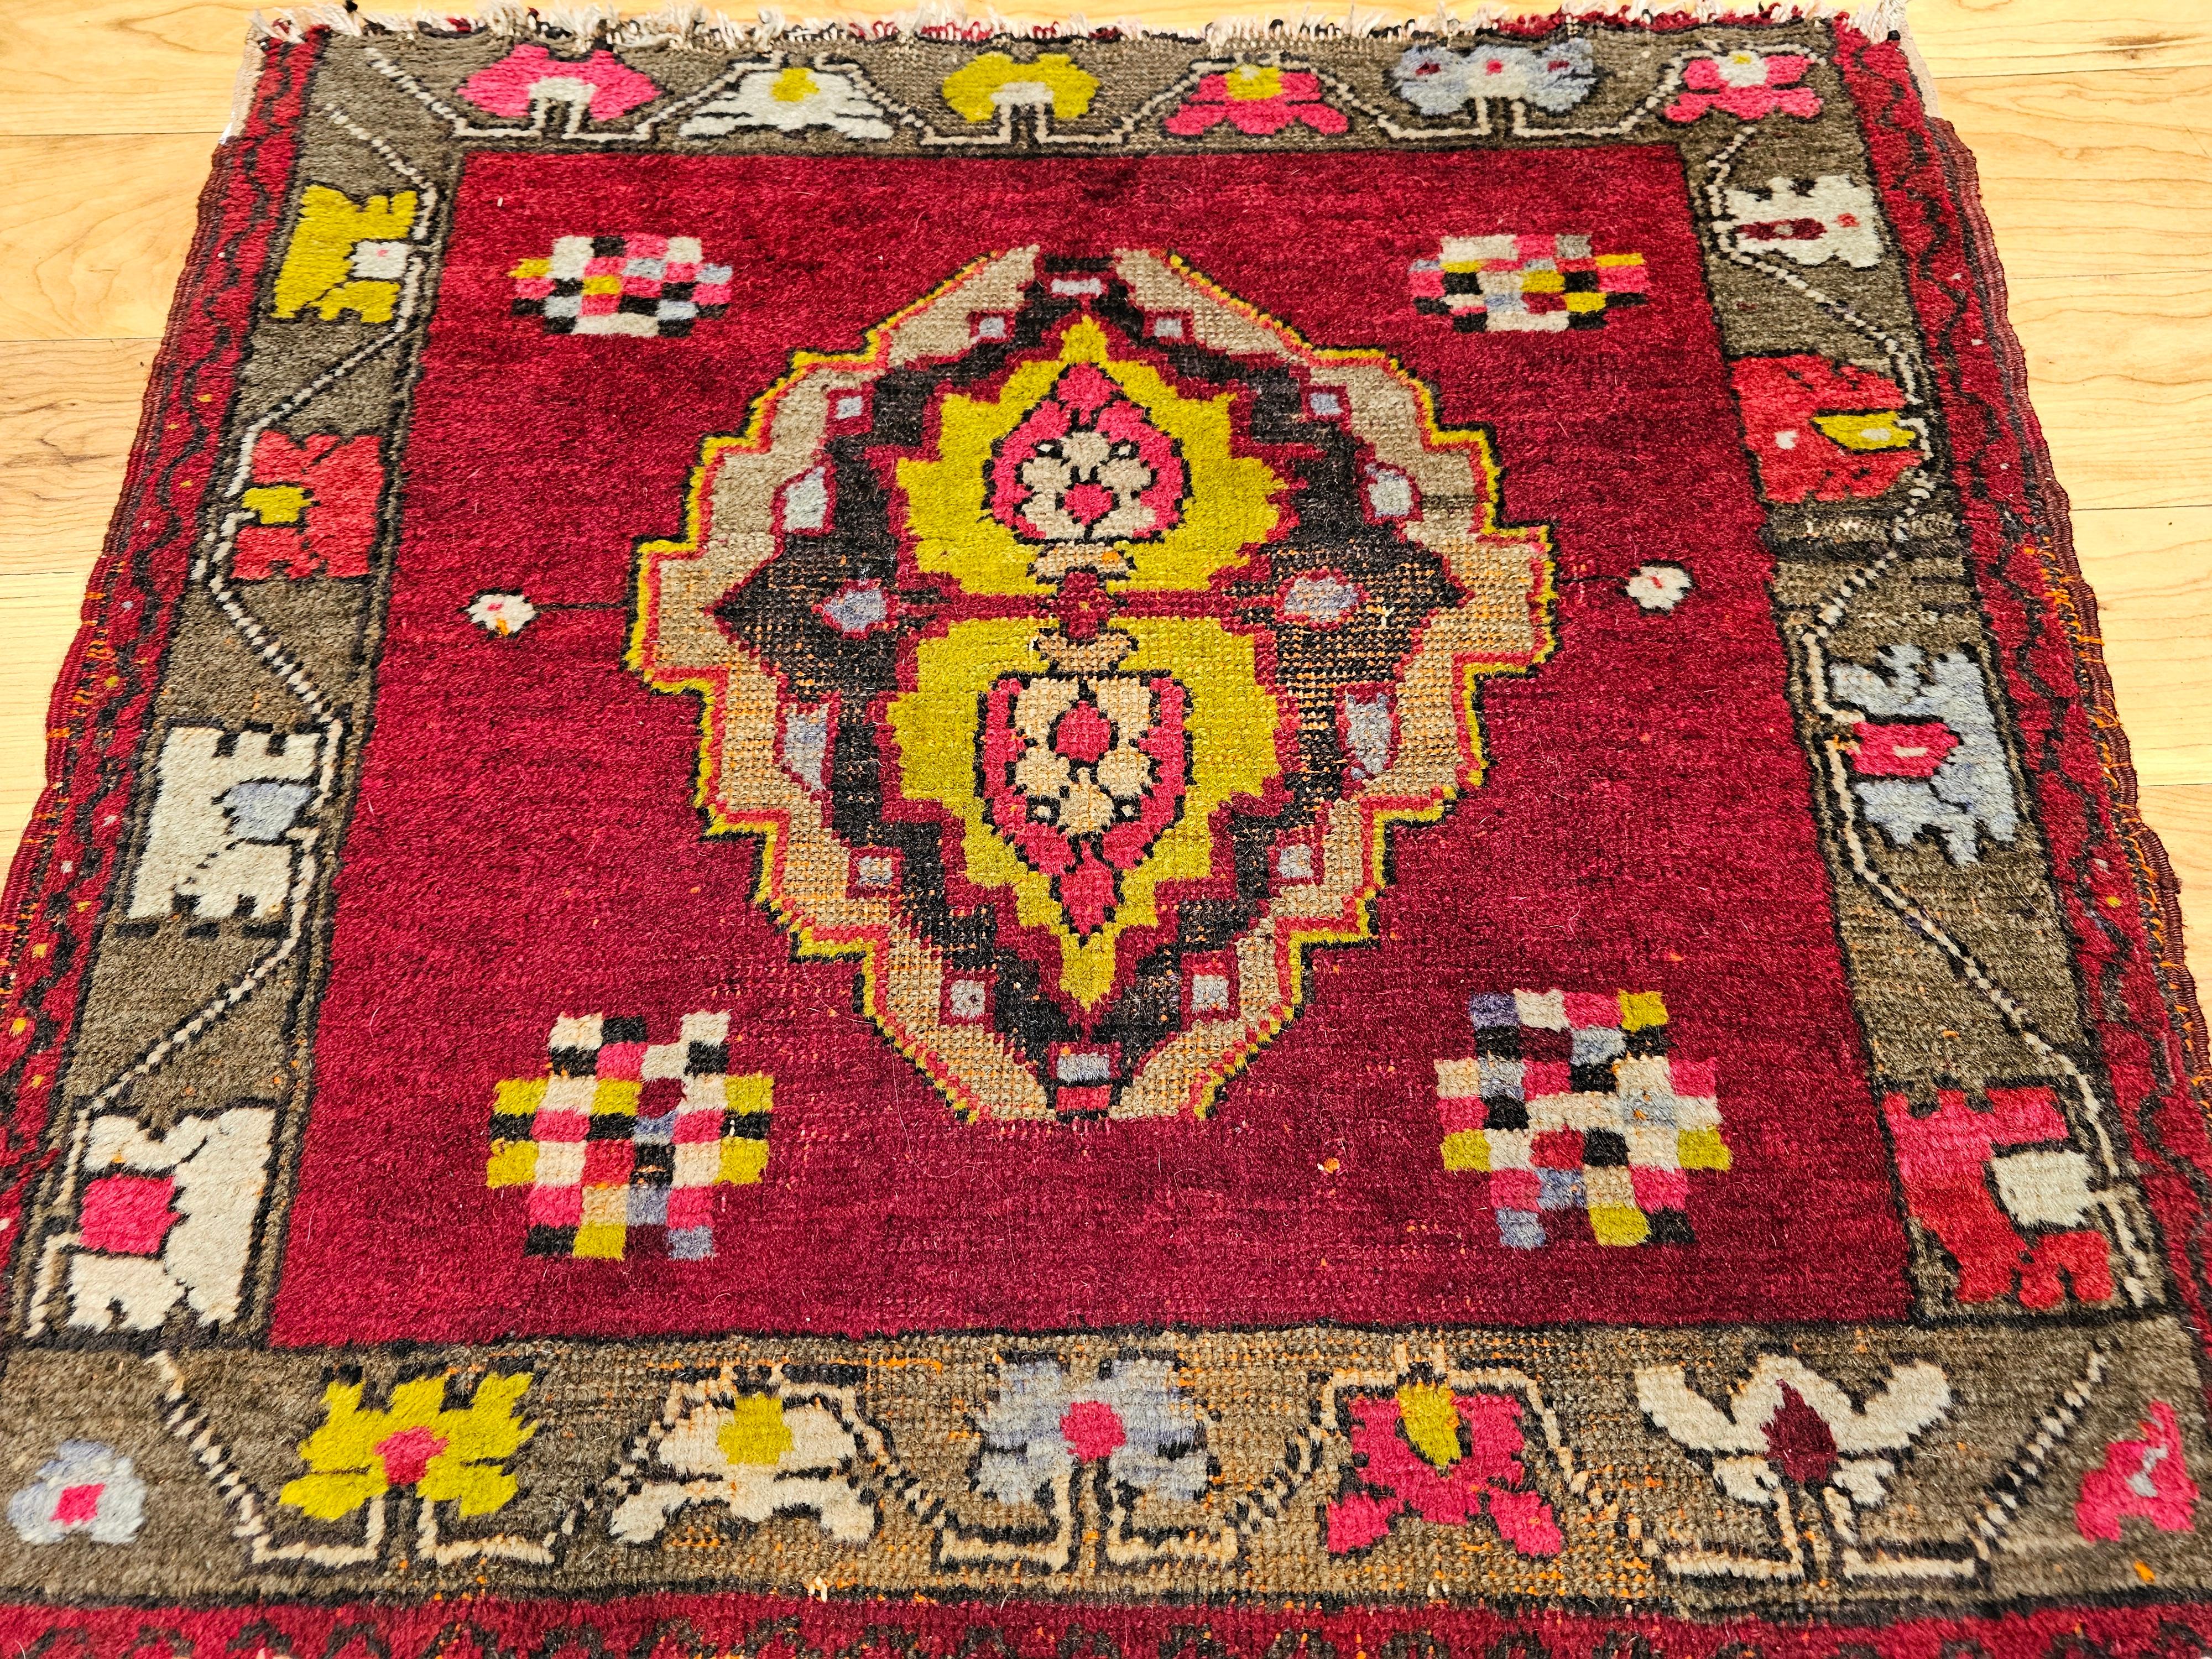 Early 20th century Turkish Oushak in a near square size which is rare and very desirable.  The rug has a large medallion design in the center and small square forms on each corner. The center medallion is contained in a red background with the